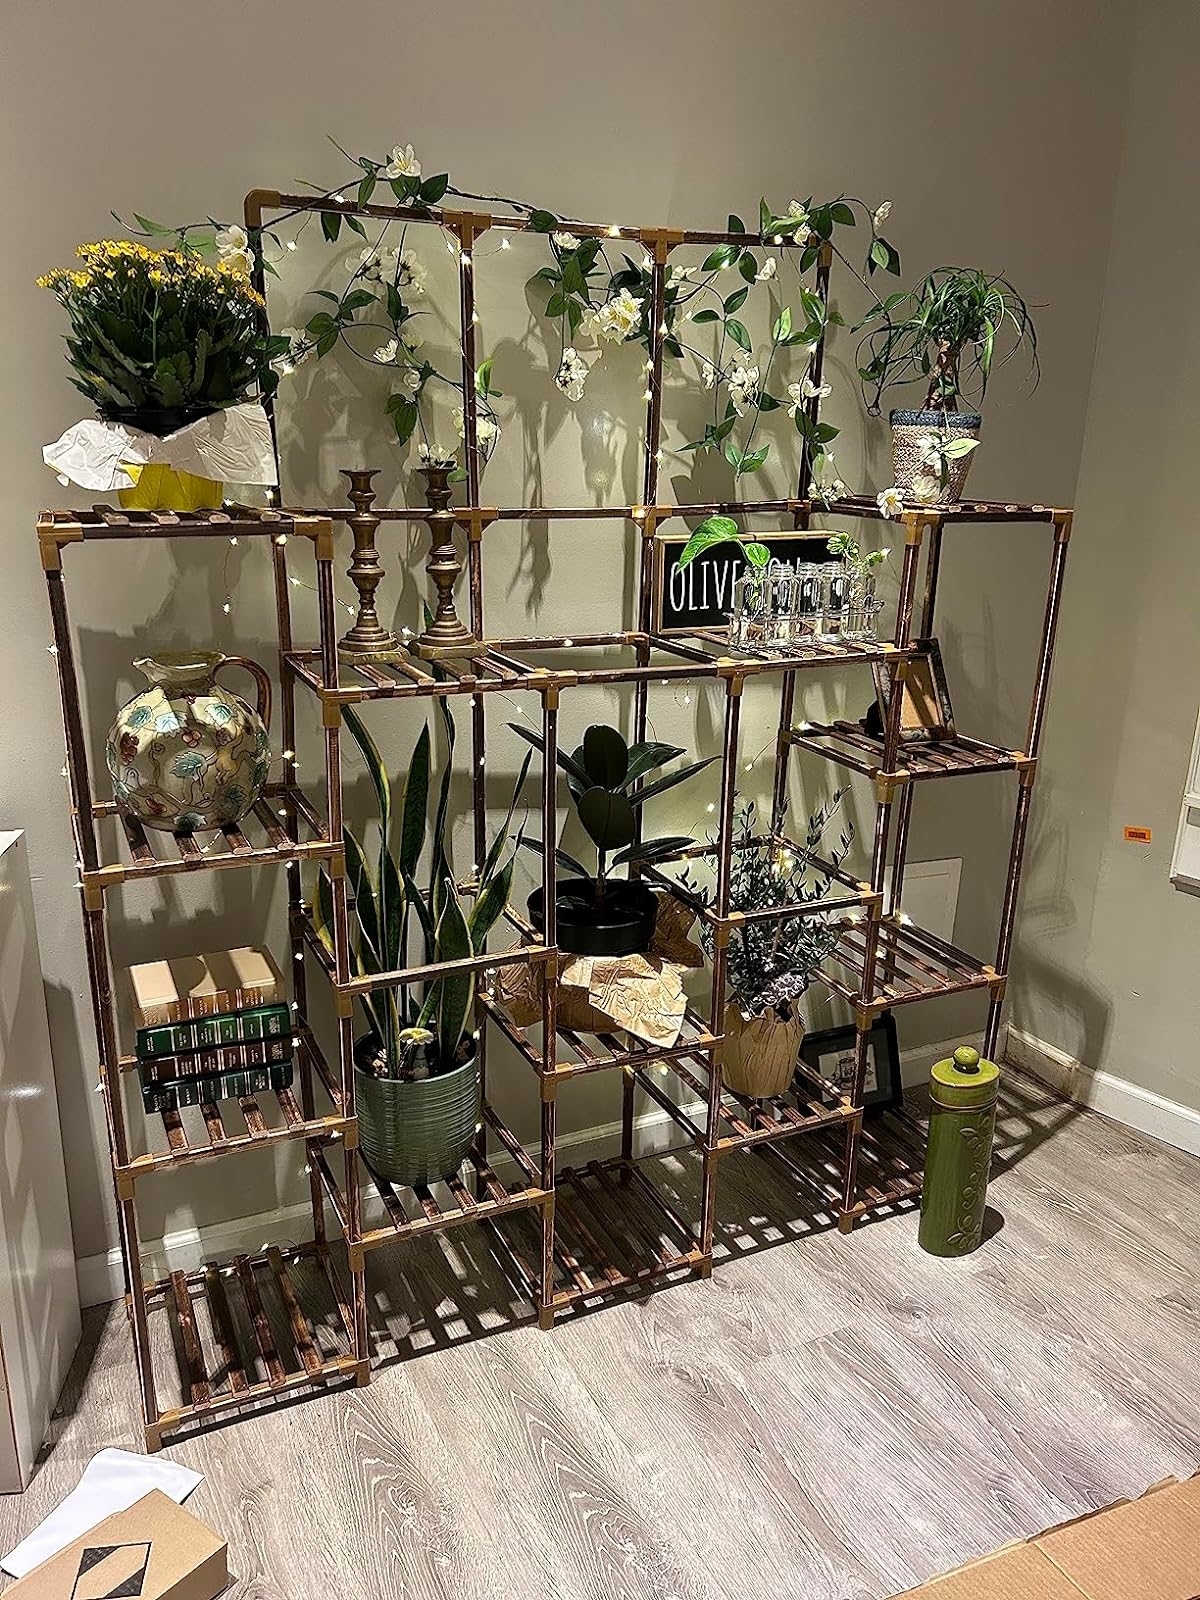 A wood shelving unit displaying a variety of houseplants, decorative items, and a sign that says &quot;OLIVE YOU&quot;